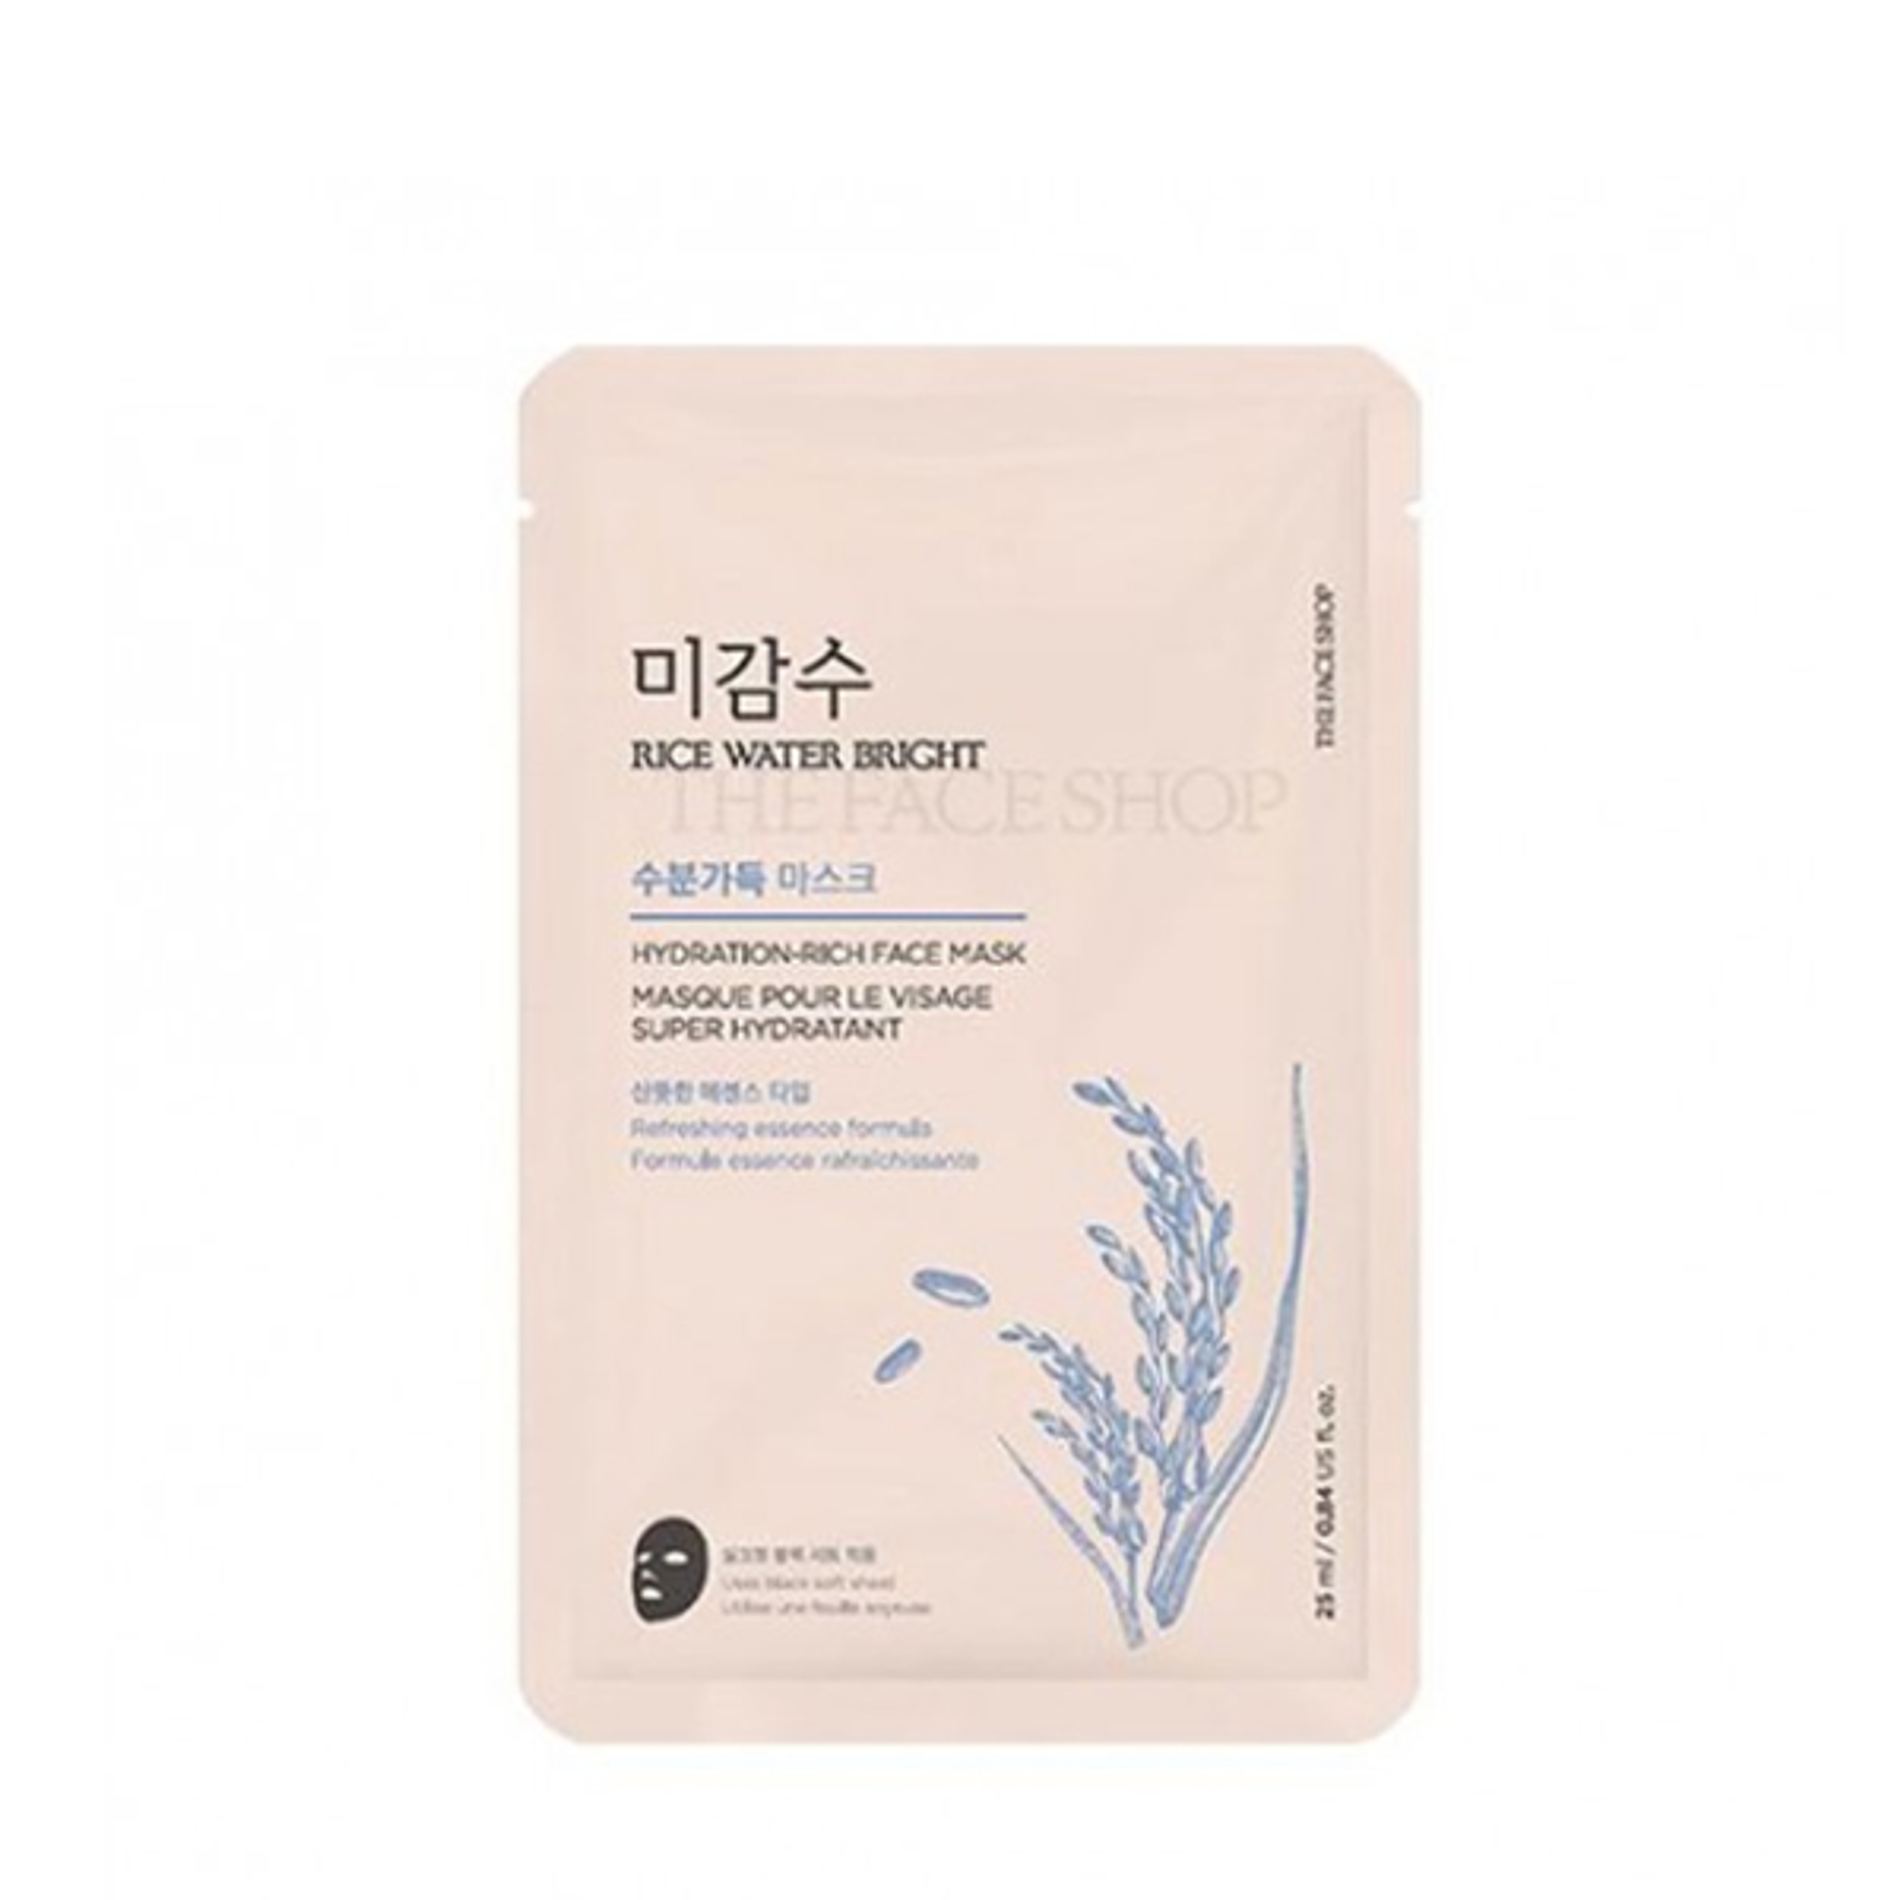 mat-na-duong-am-thanh-loc-da-thefaceshop-rice-water-bright-hydration-rich-mask-25ml-4